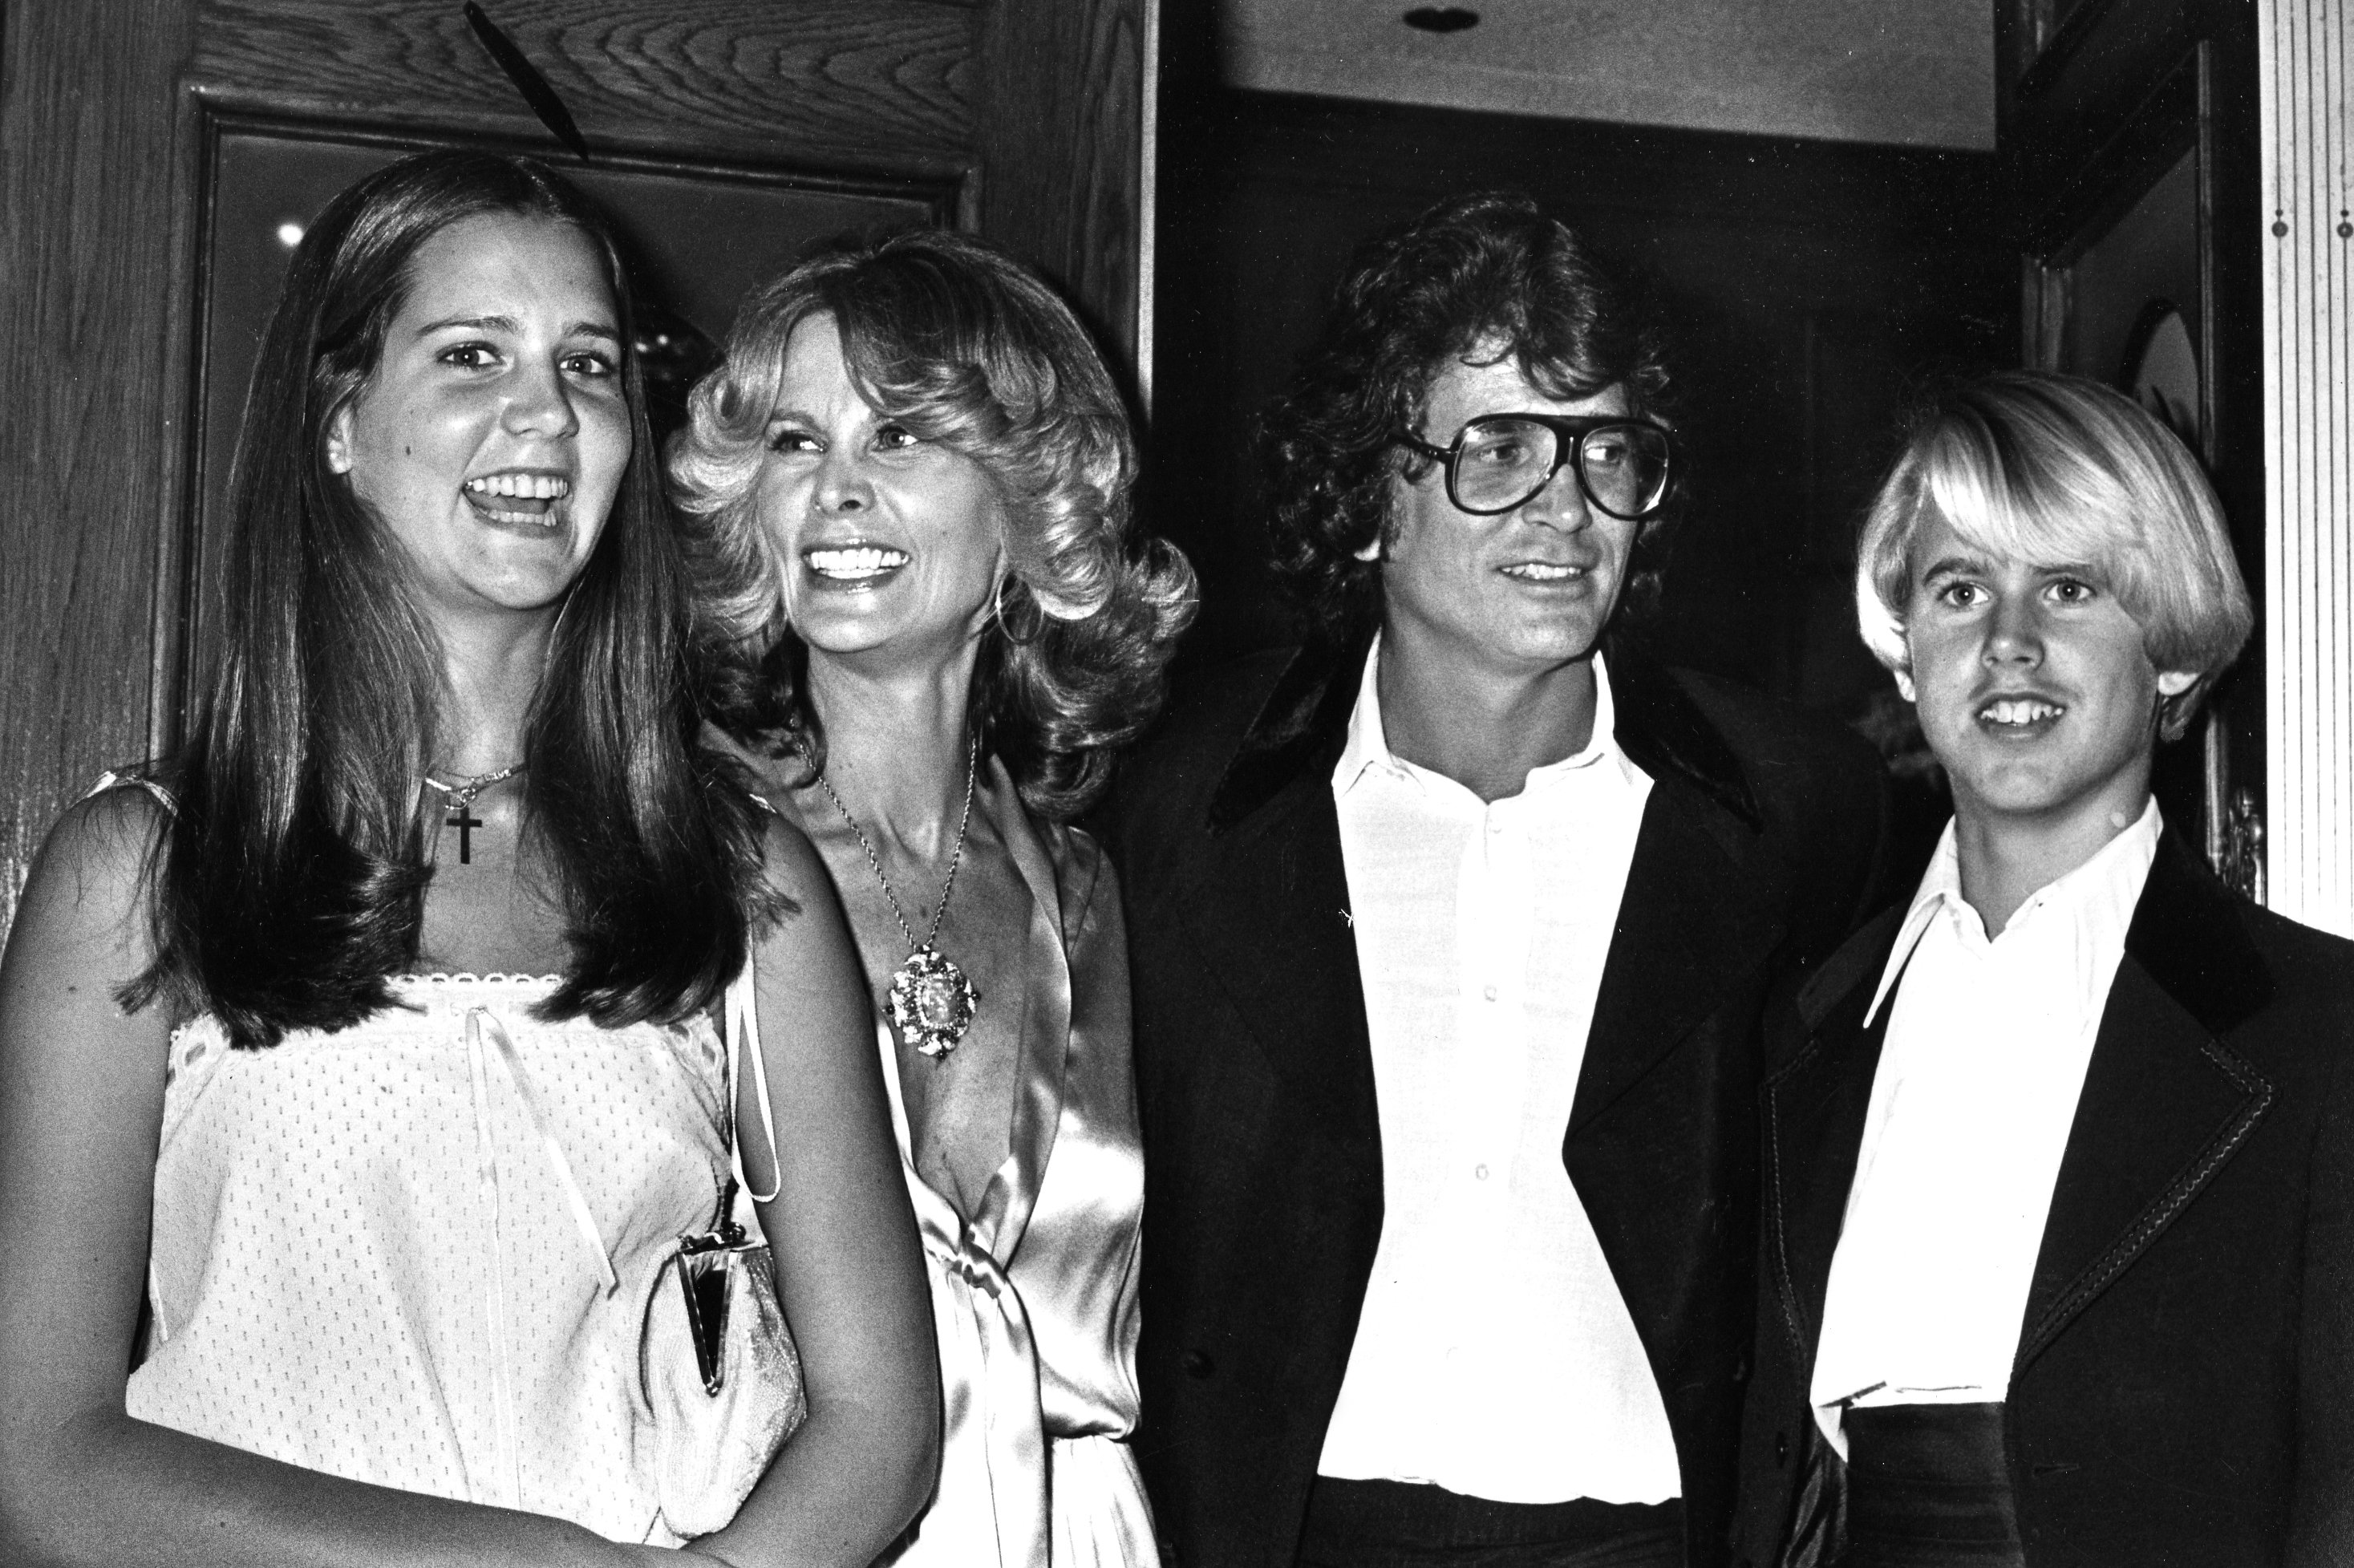 Actor Michael Landon, wife Lynn Noe, daughter Leslie Landon and son Michael Landon Jr. at the Fourth Annual People's Choice Awards on February 20, 1978, in Los Angeles, California | Source: Getty Images